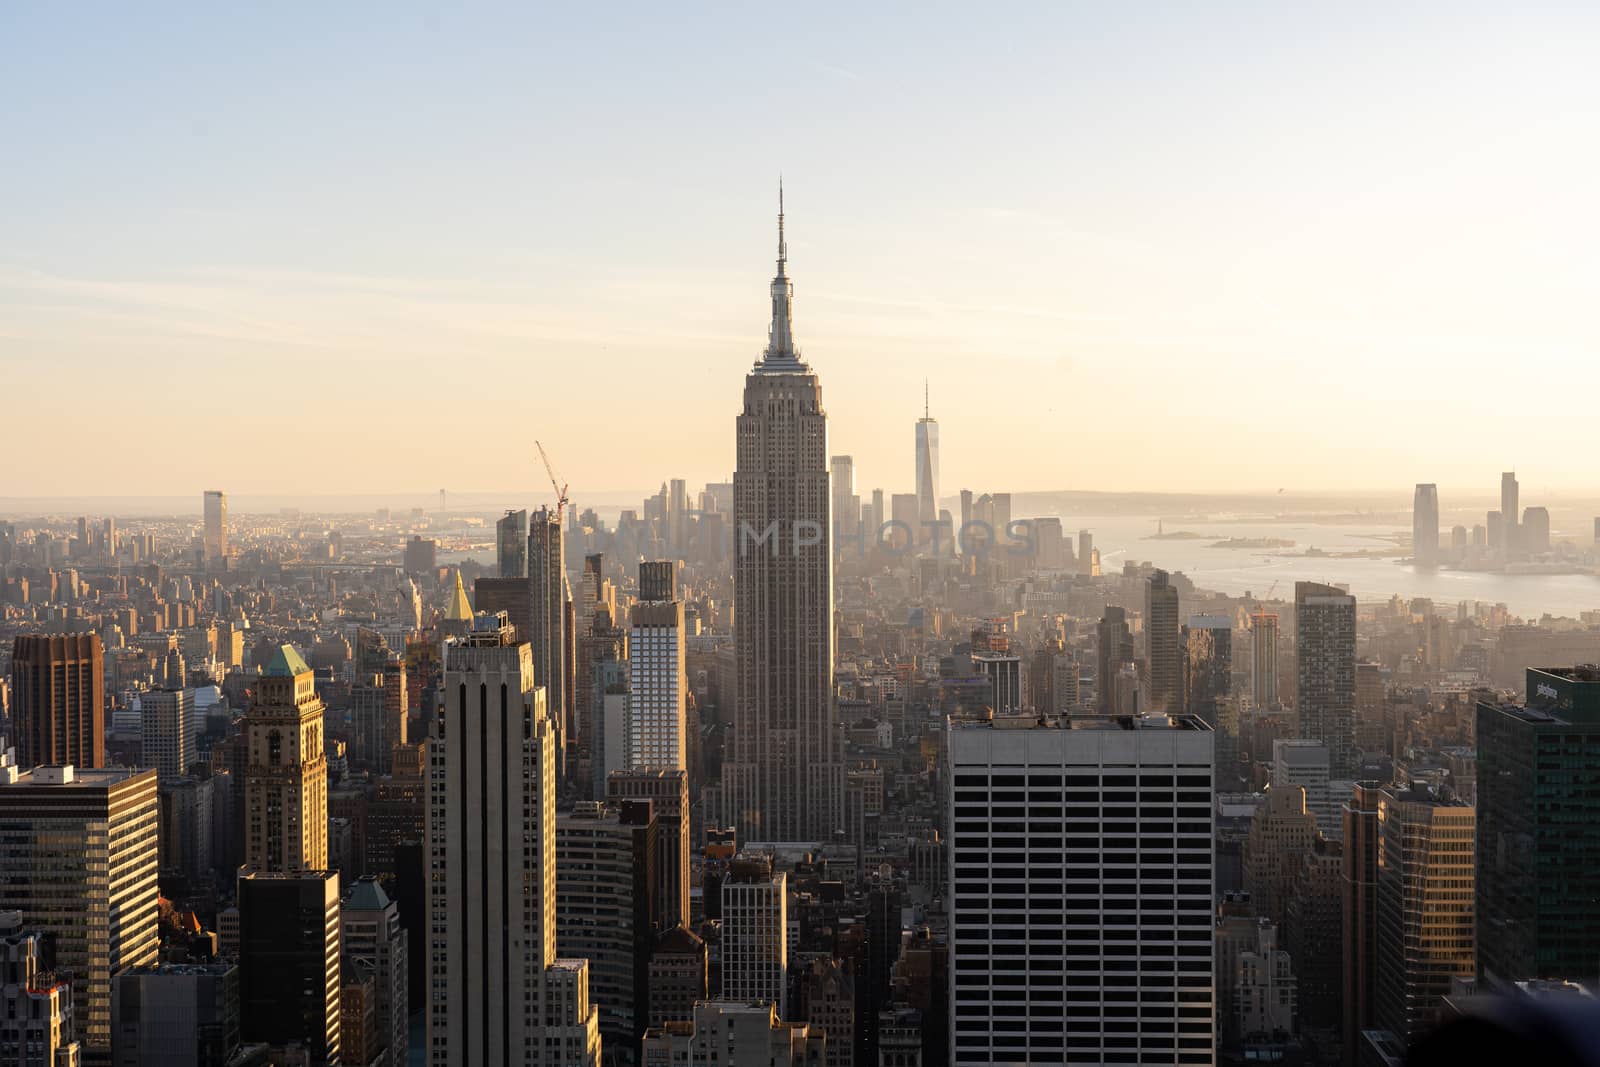 NYC, USA - September 21, 2019: NYC skyline with the Empire State Building in the foreground seen from top of the Rockefeller Center